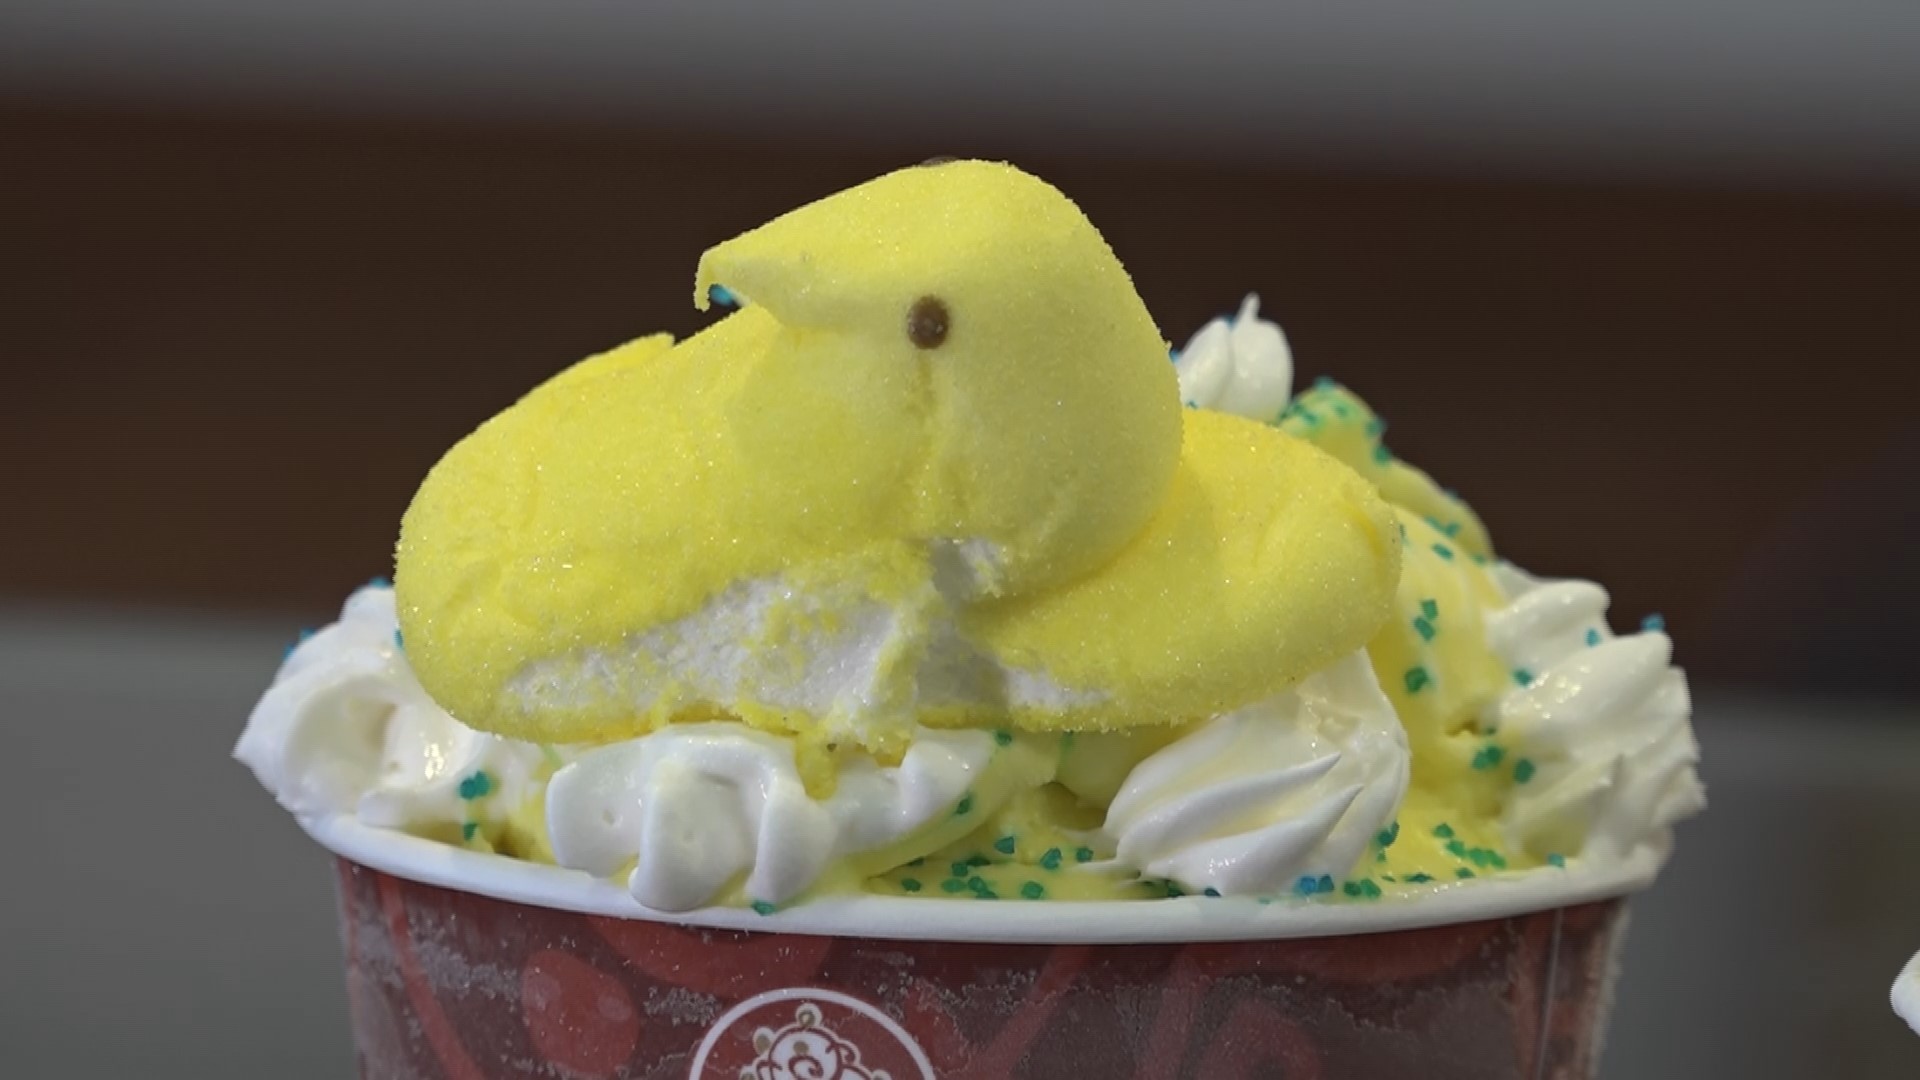 Spring has Sprung at Cold Stone Creamery with New PEEPS Ice Cream